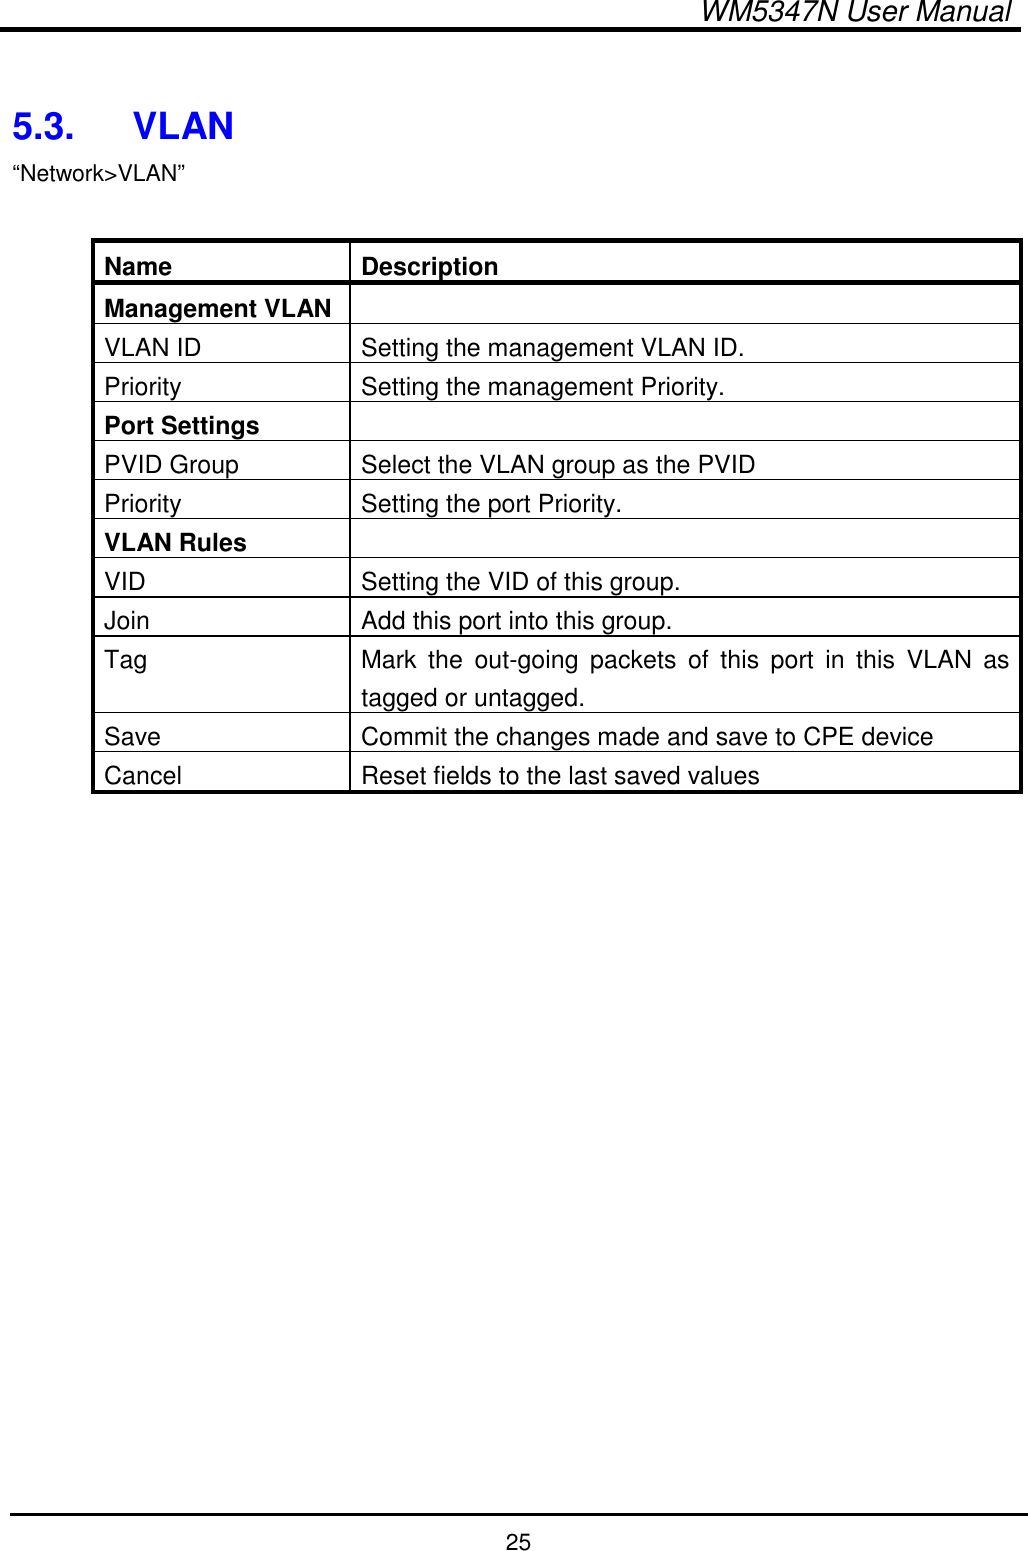  WM5347N User Manual  25  5.3.  VLAN “Network&gt;VLAN”  Name  Description Management VLAN  VLAN ID  Setting the management VLAN ID. Priority  Setting the management Priority. Port Settings   PVID Group  Select the VLAN group as the PVID Priority  Setting the port Priority. VLAN Rules   VID  Setting the VID of this group. Join  Add this port into this group. Tag  Mark  the  out-going  packets  of  this  port  in  this  VLAN  as tagged or untagged. Save  Commit the changes made and save to CPE device Cancel  Reset fields to the last saved values  